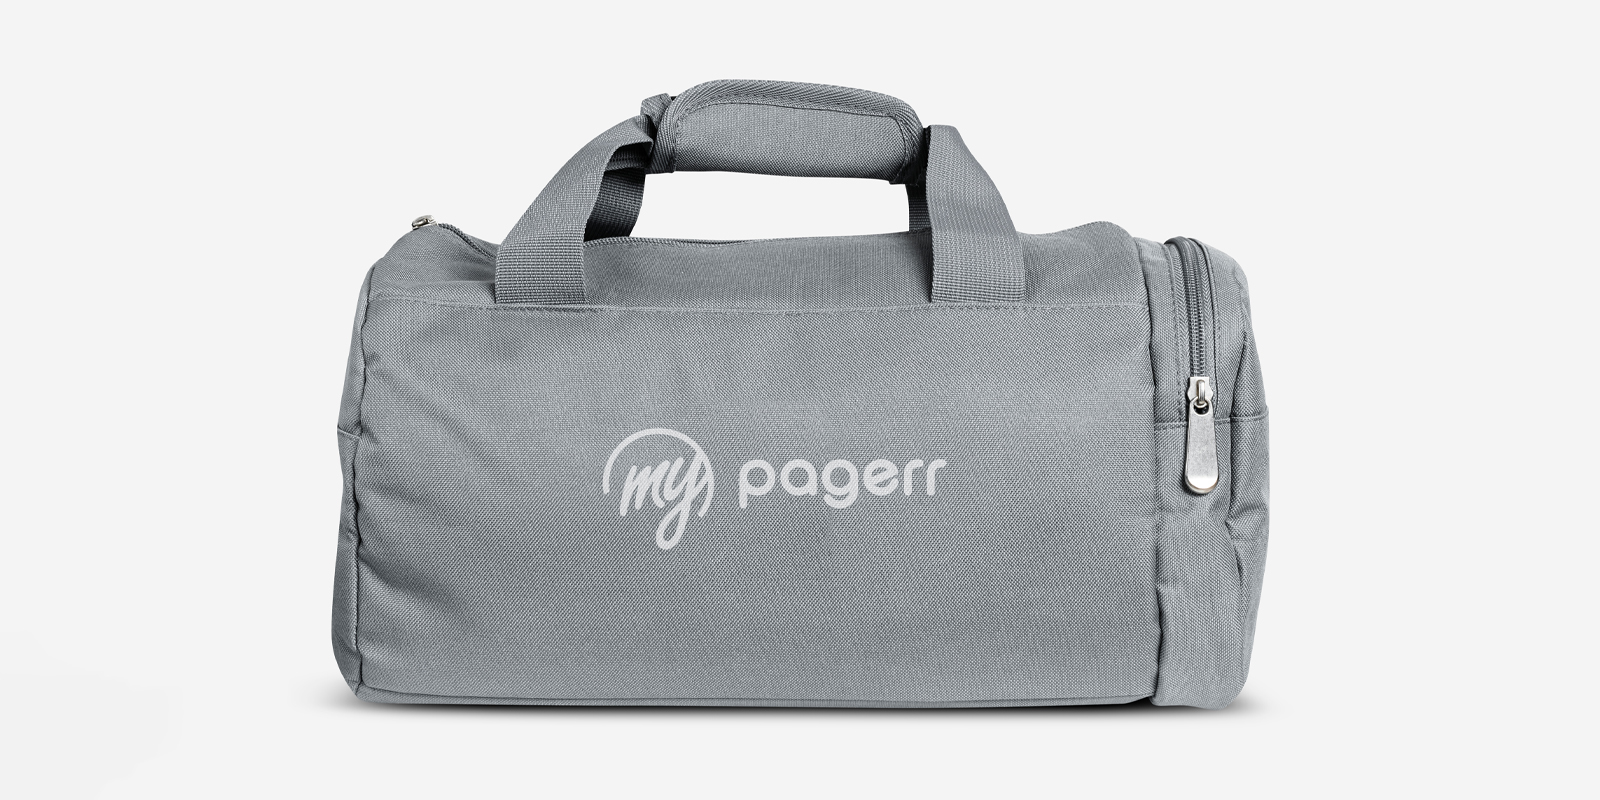 Duffel & gym bags in Brisbane - Print with Pagerr